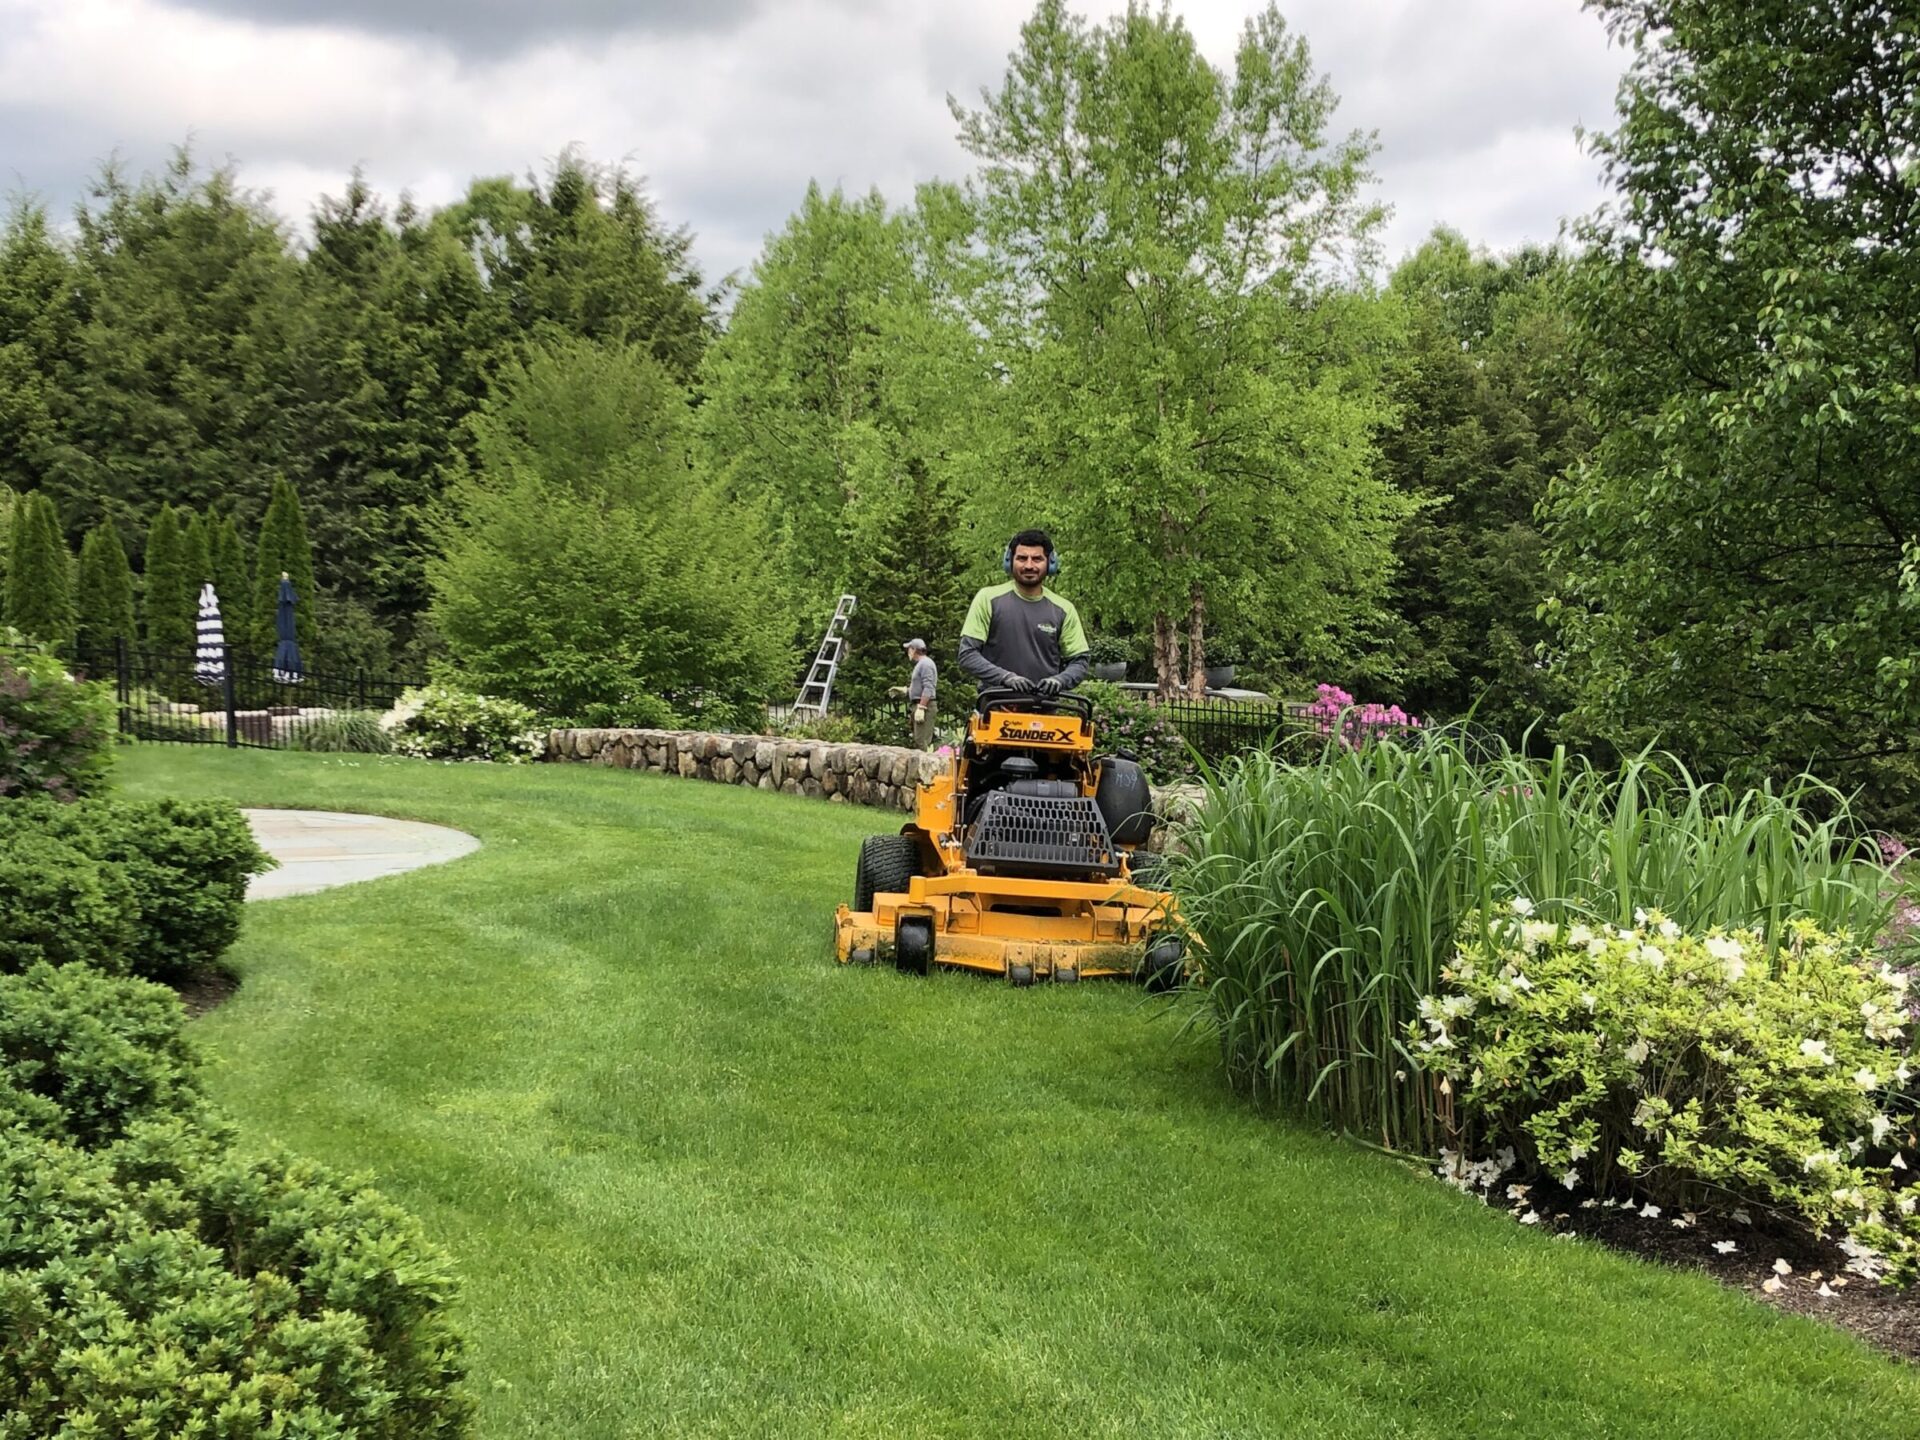 A person is riding a lawn mower in a well-manicured garden with lush greenery, flowers, and a second person standing by a ladder.